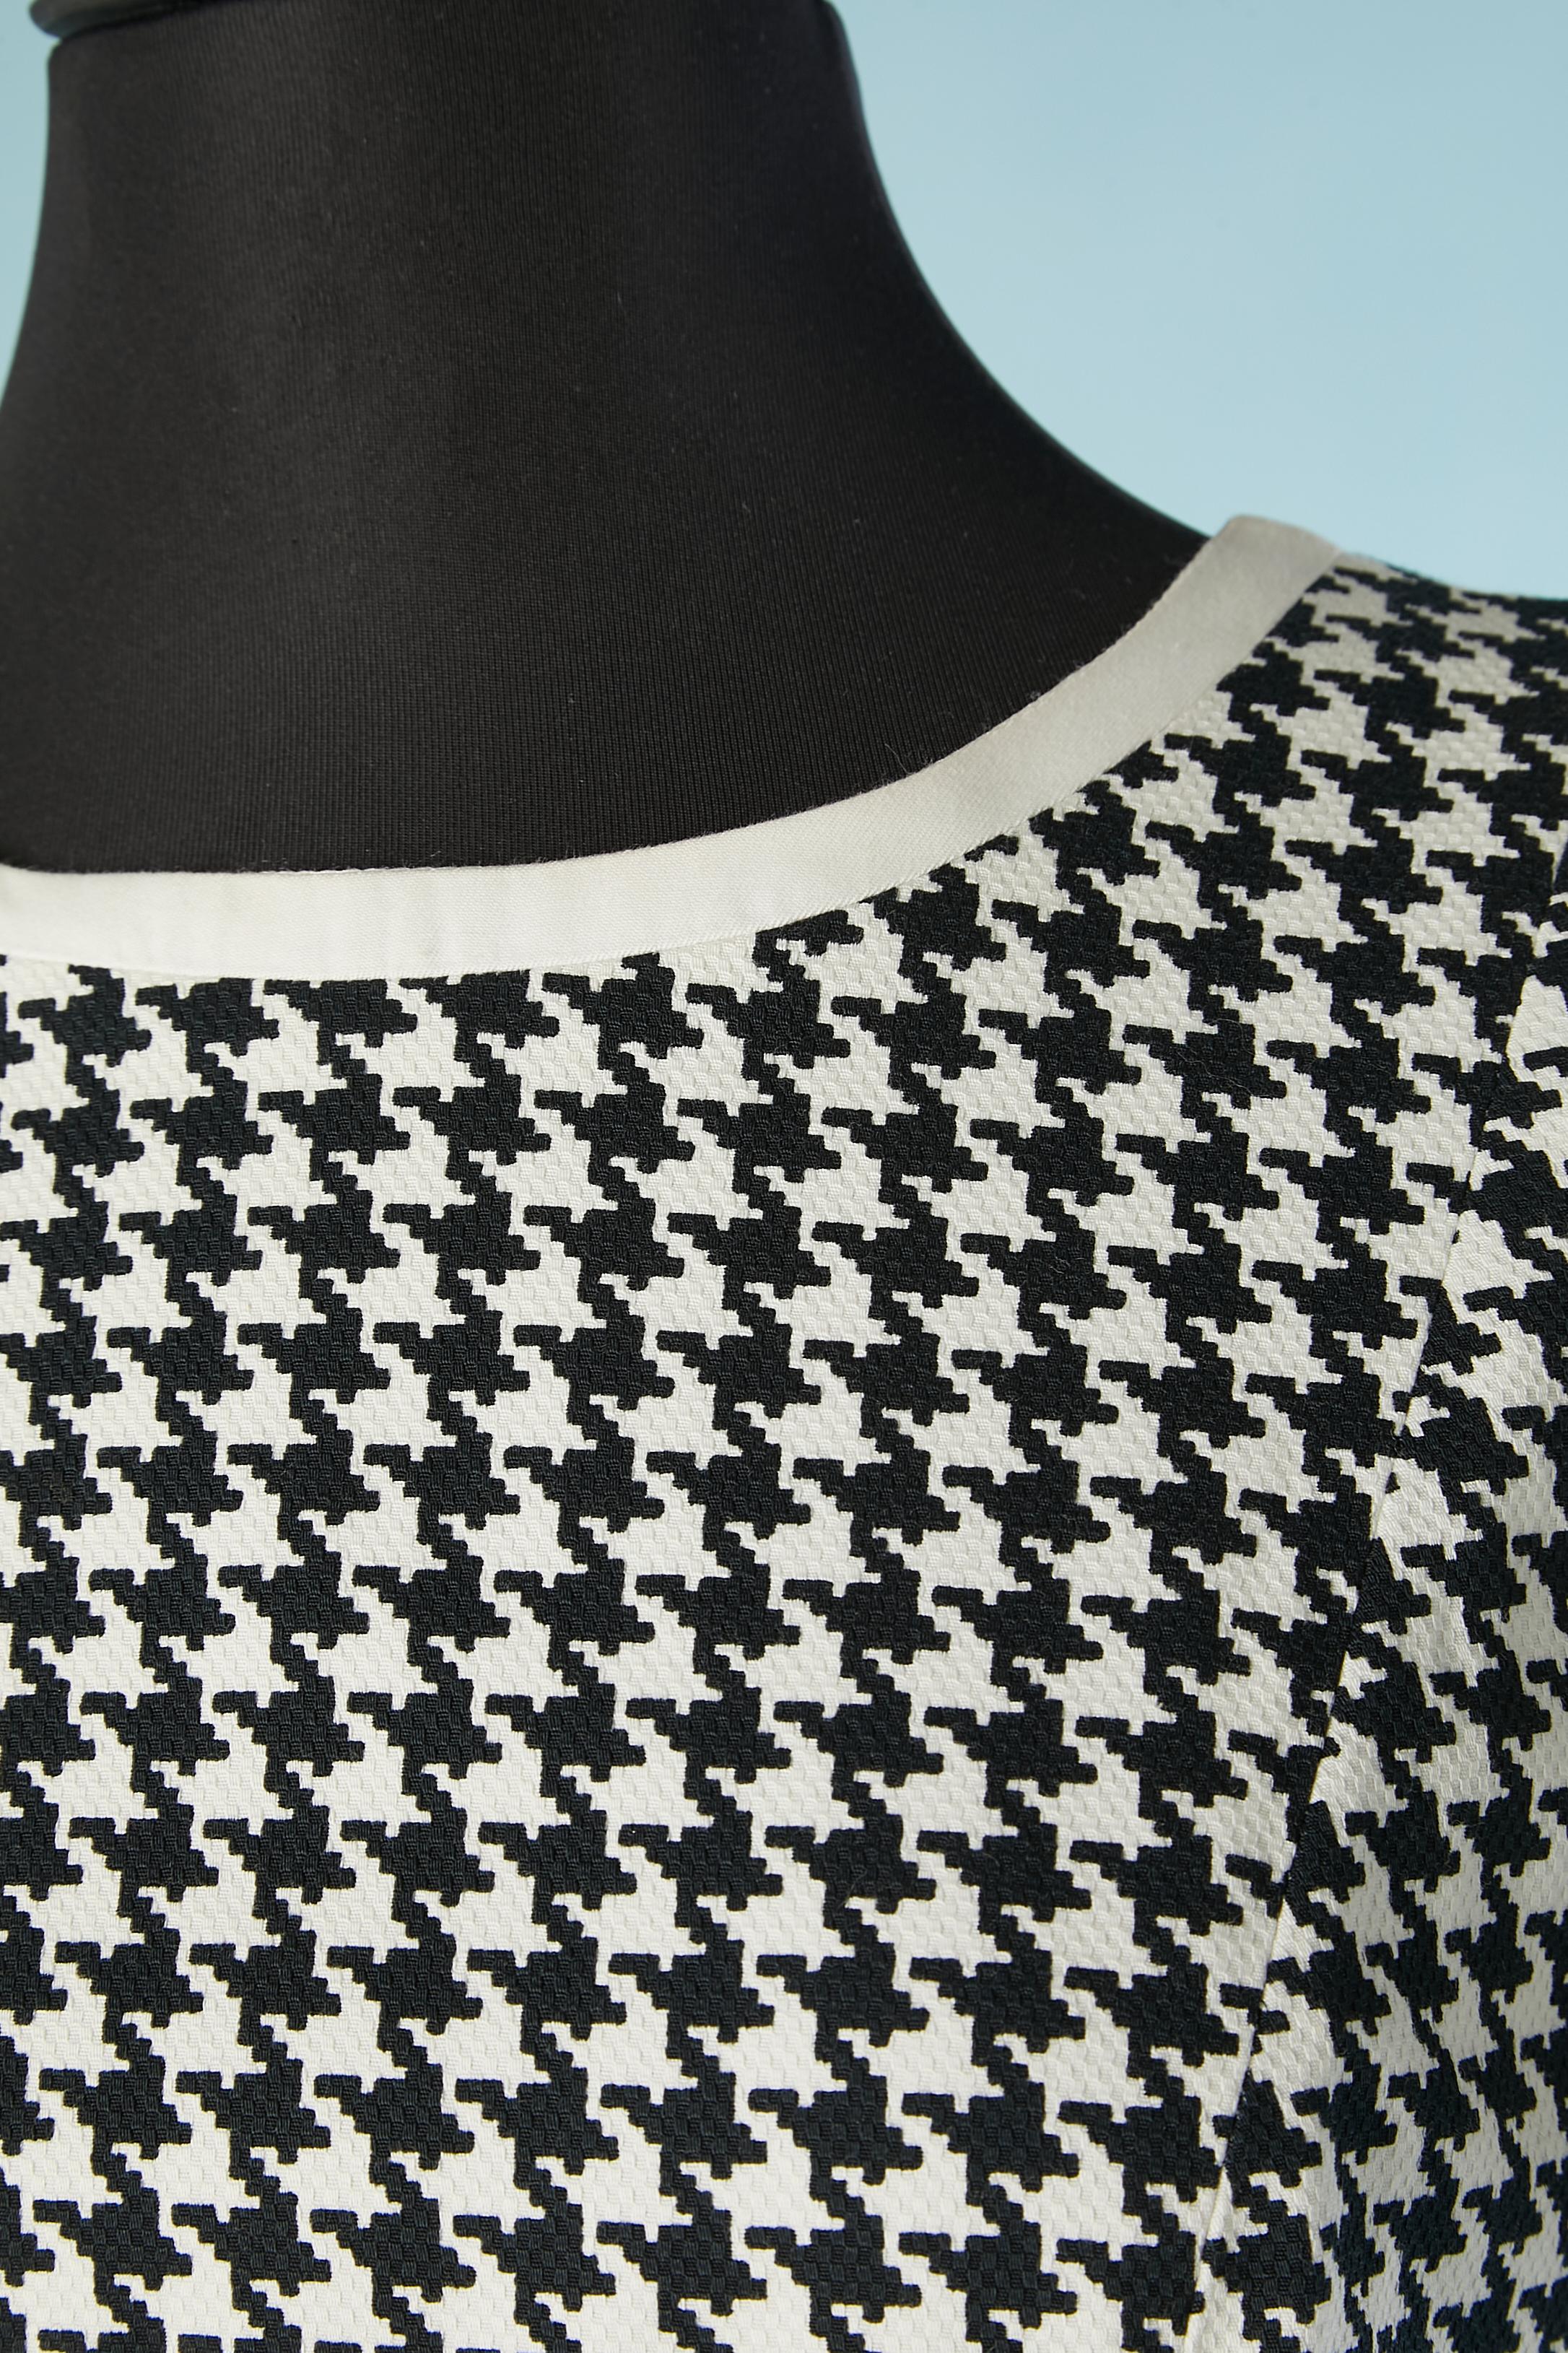 Black & white houndstooth pattern dress. Fabric:100% cotton. Lining: 100% polyester. Zip in the middle back. Piping on collar and sleeve edge. Split in the side back, lenght: 26 cm